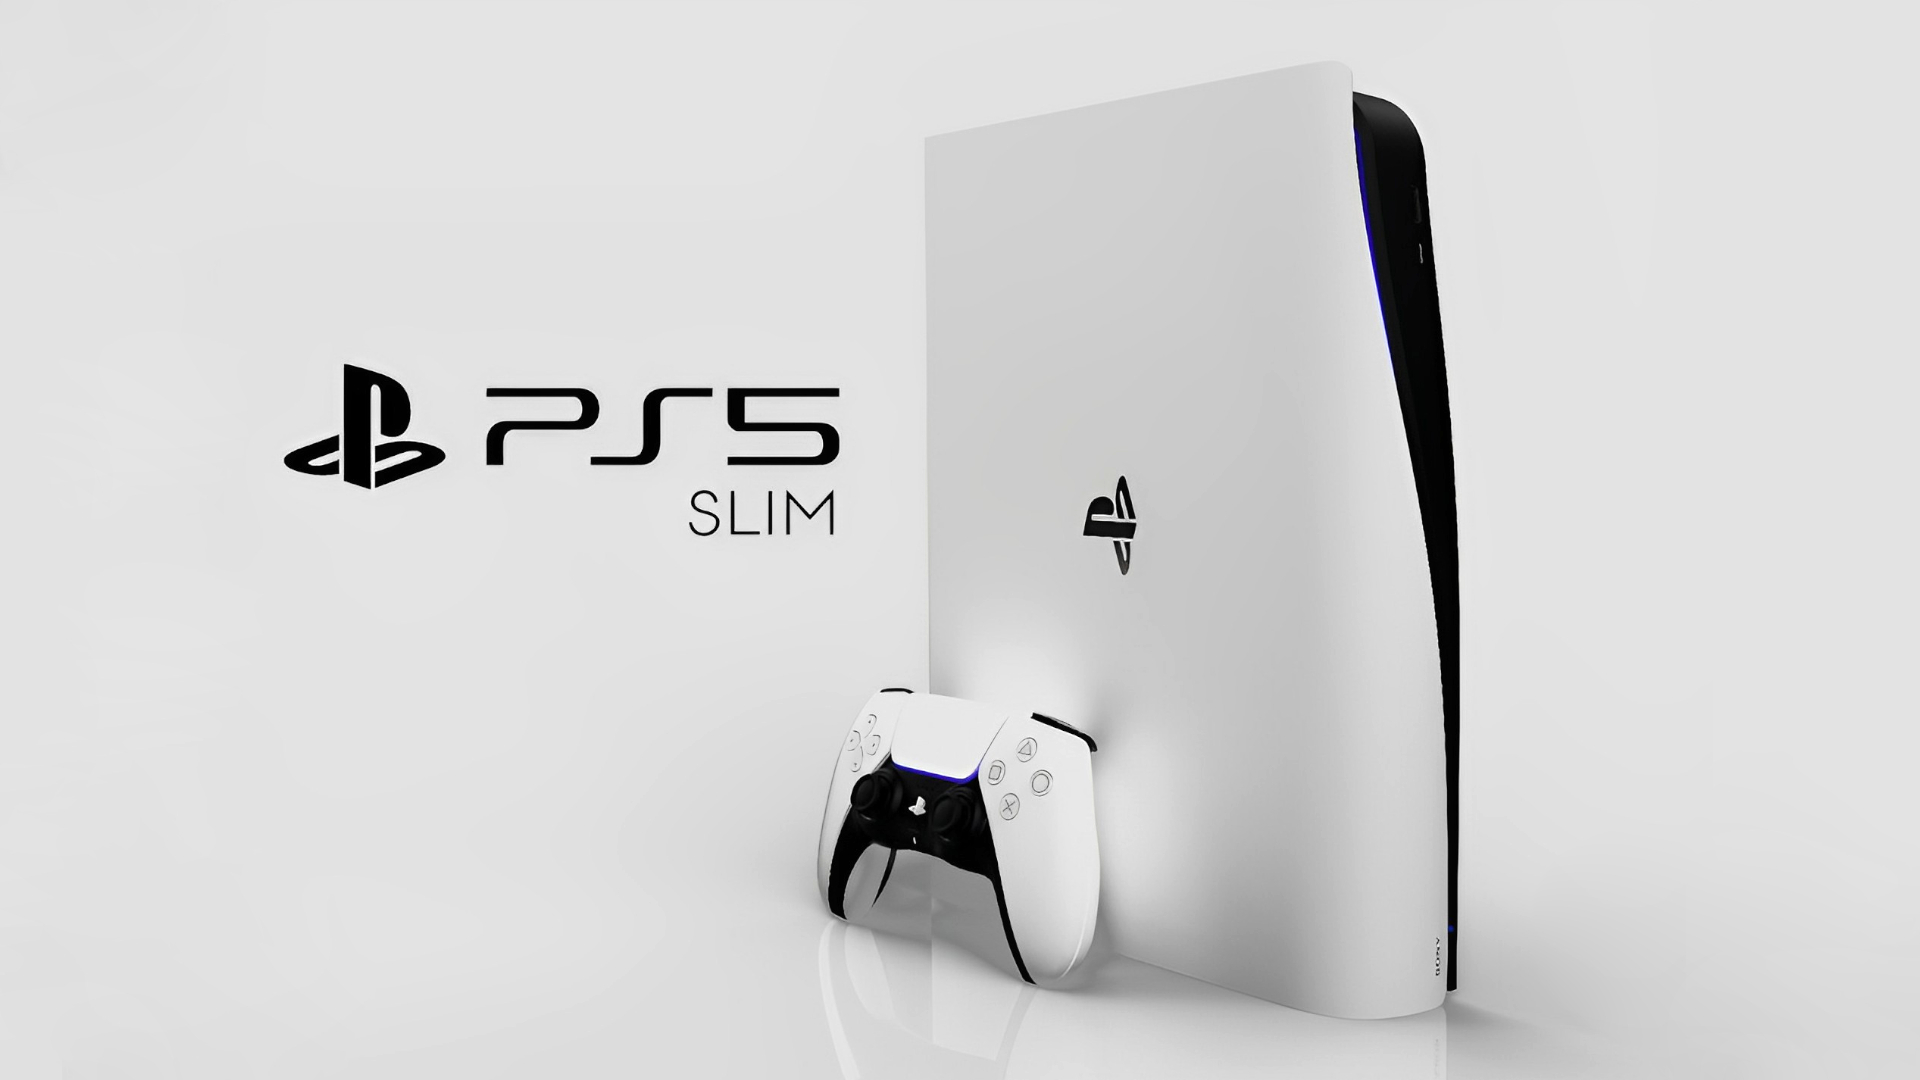 Where to buy PS5 Slim: Price, features, availability and more